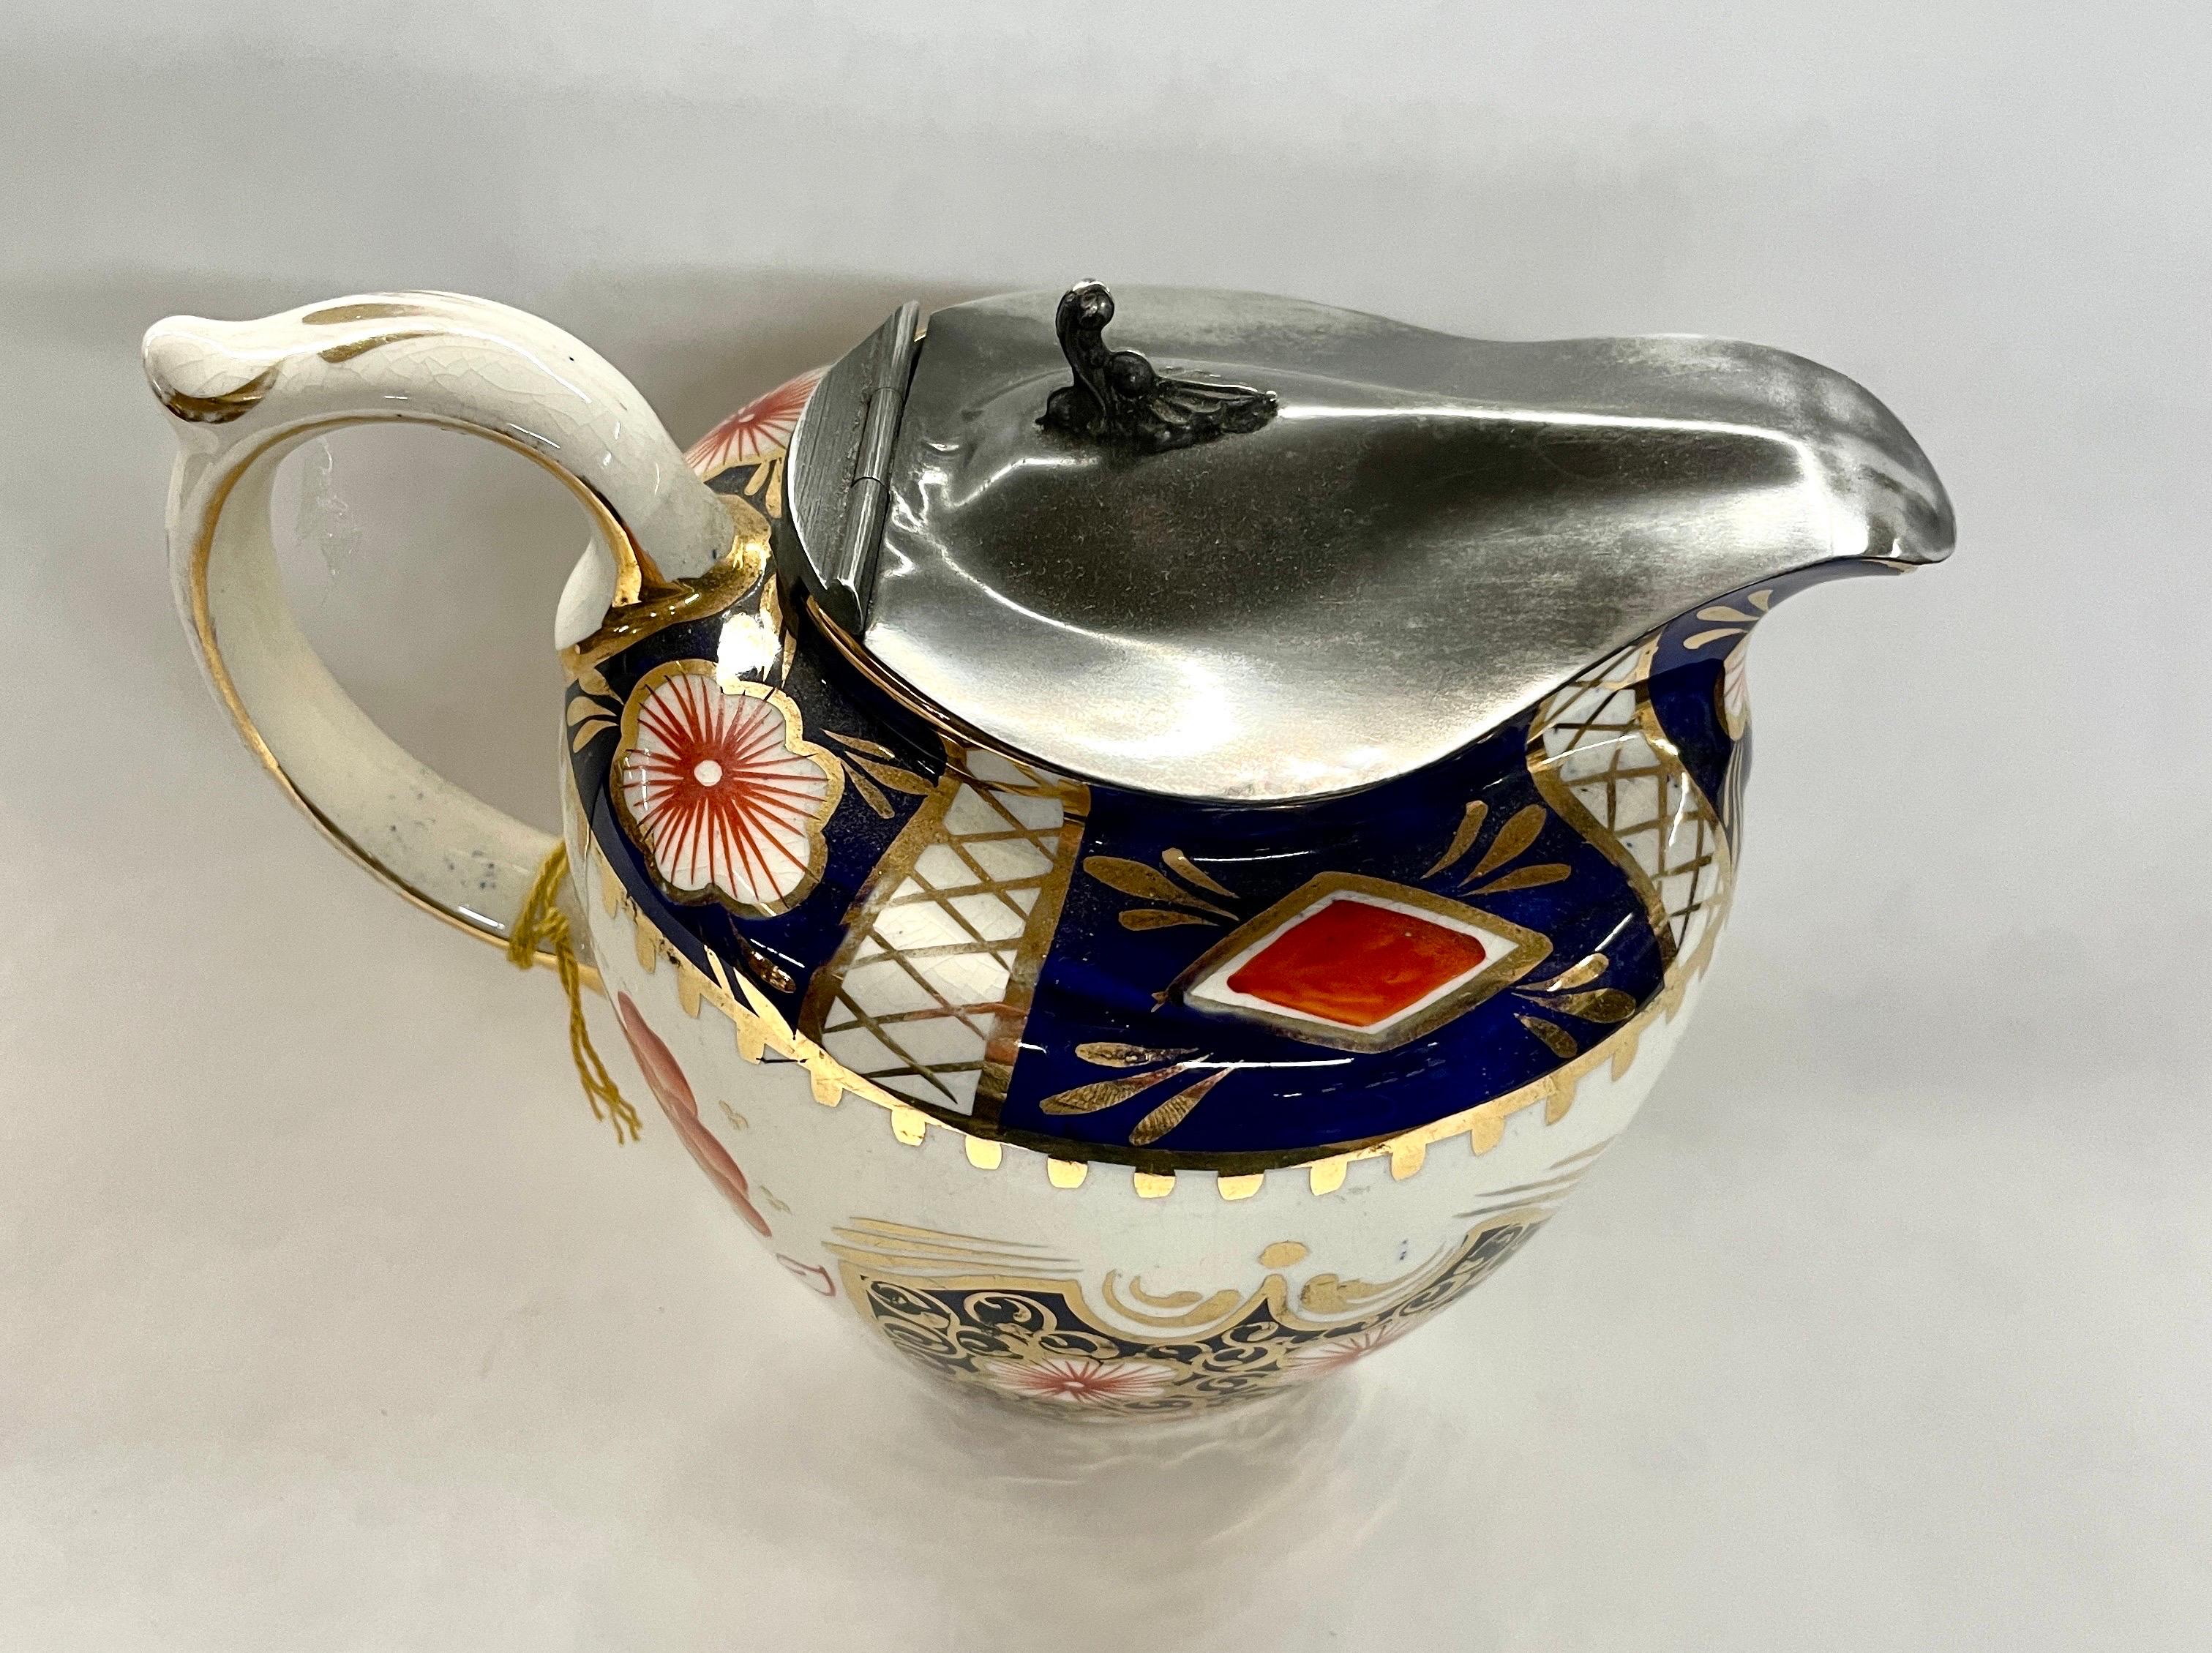 A gorgeous Antique English middle to late 19th century pewter lidded Imari decor Jug or Pitcher. The hand painted decor is similar to those originated by the Derby factory during the George III period, but this is a later 